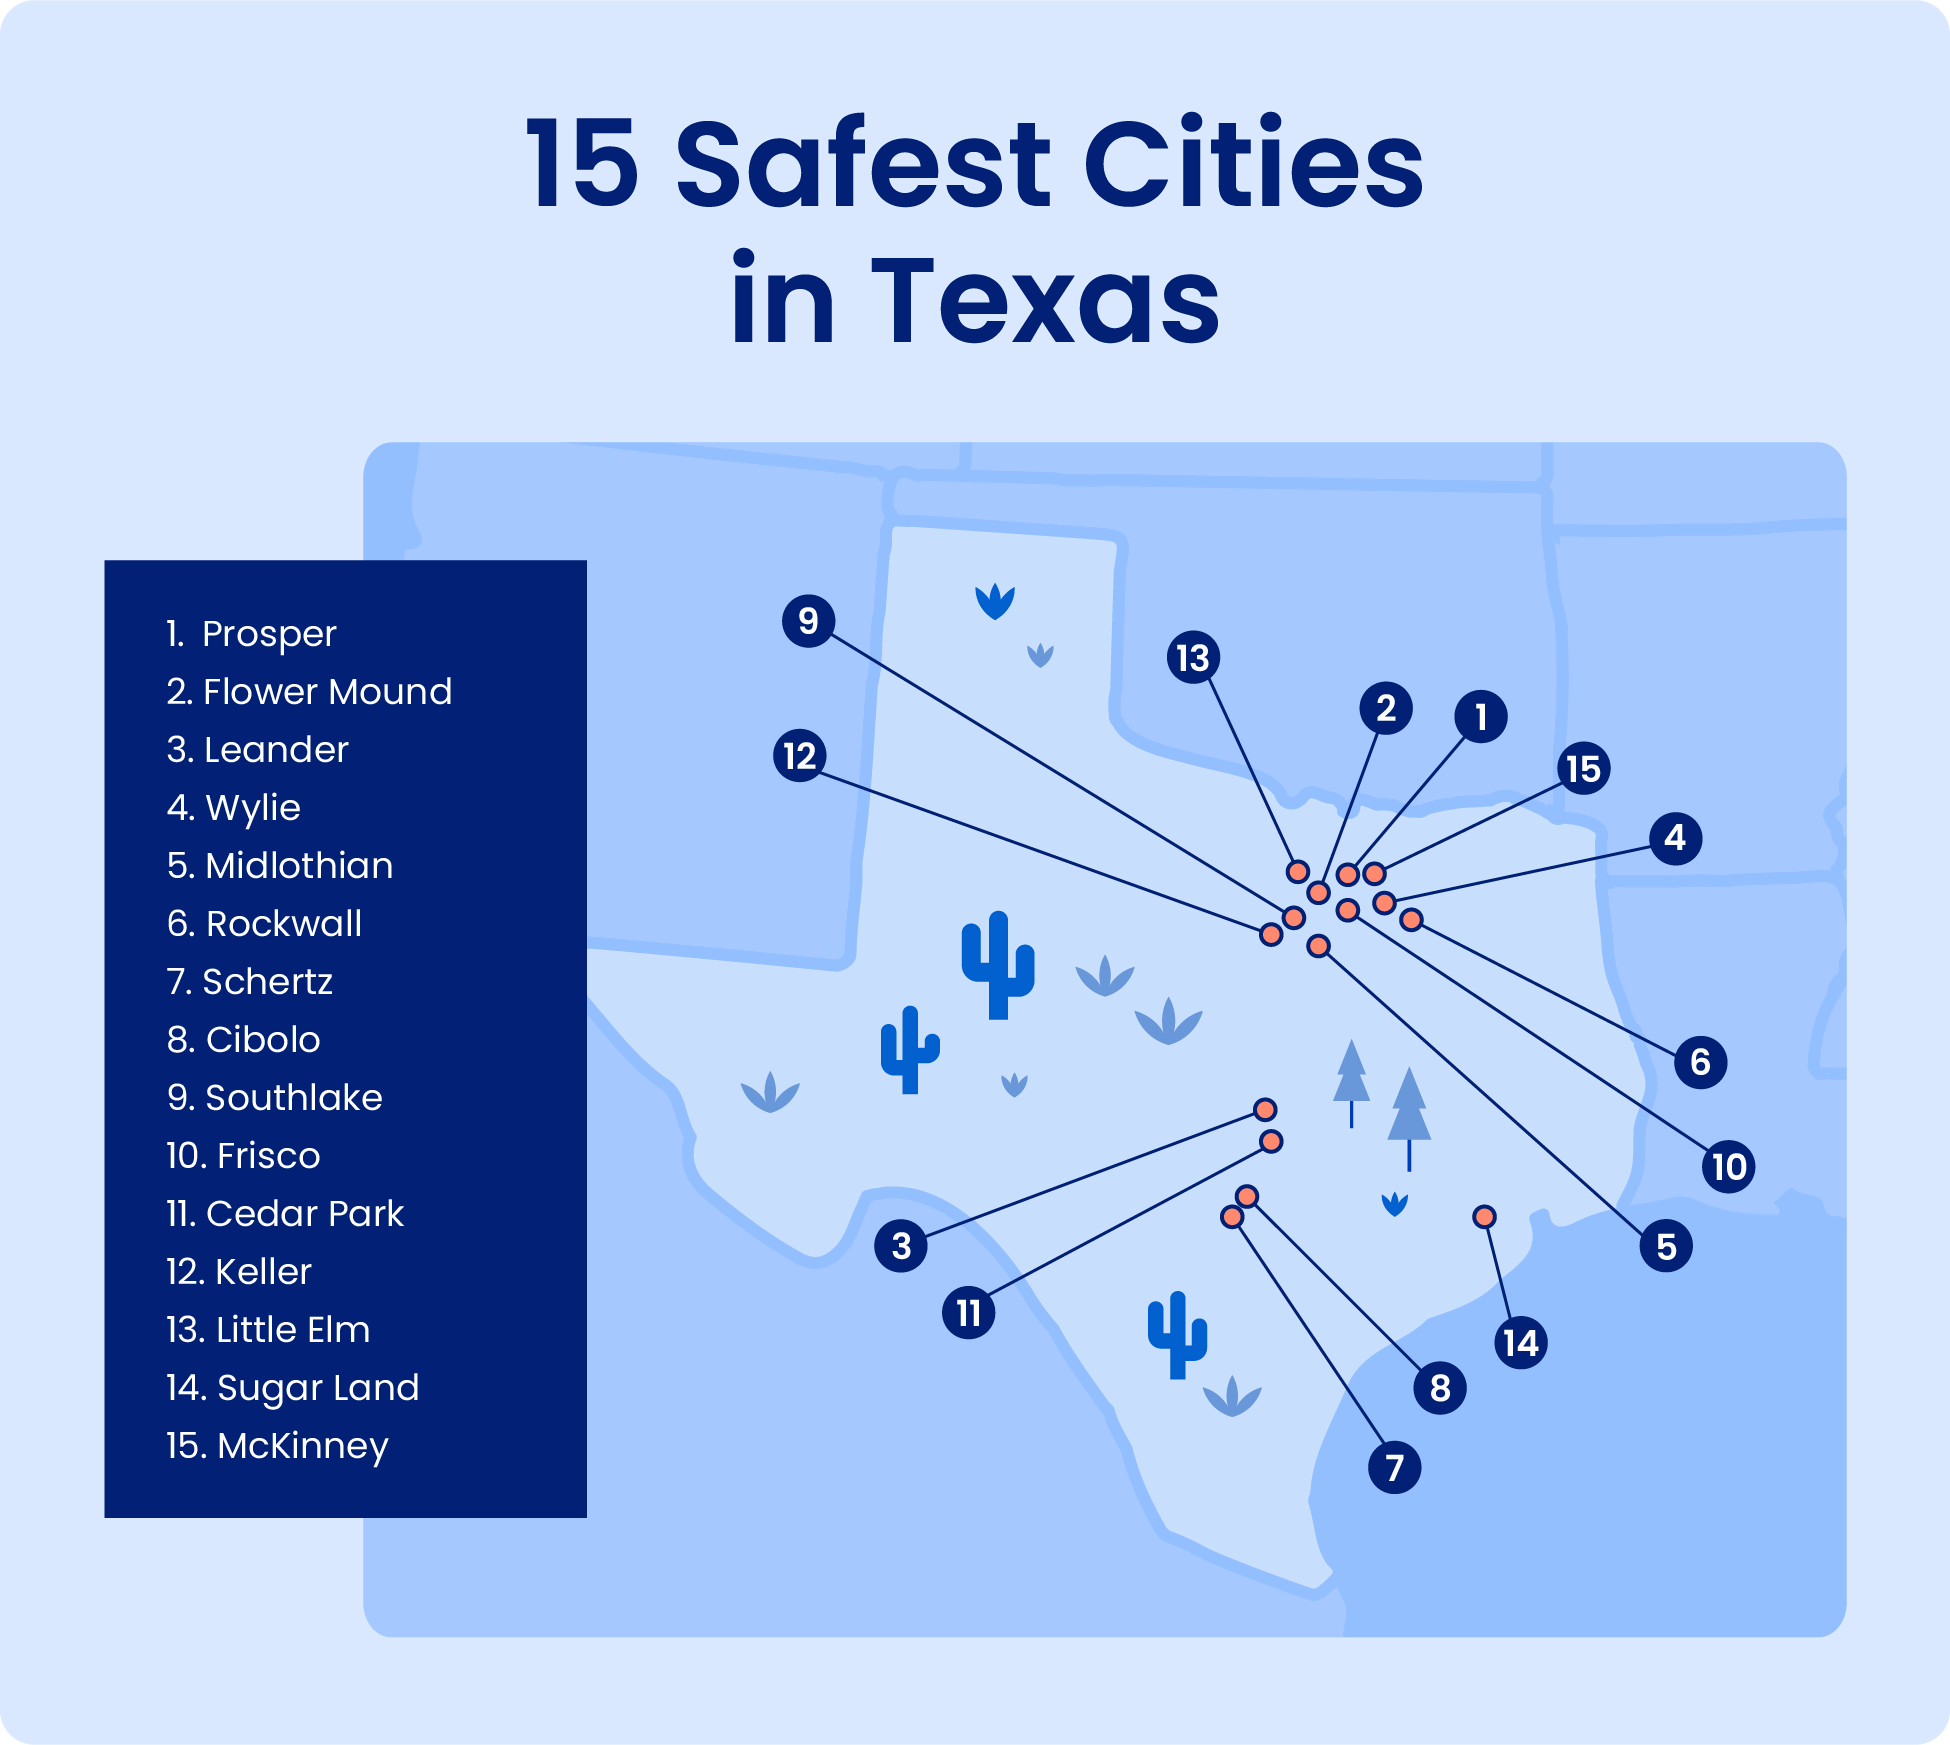 Image is a map that shows the 15 safest cities in Texas.